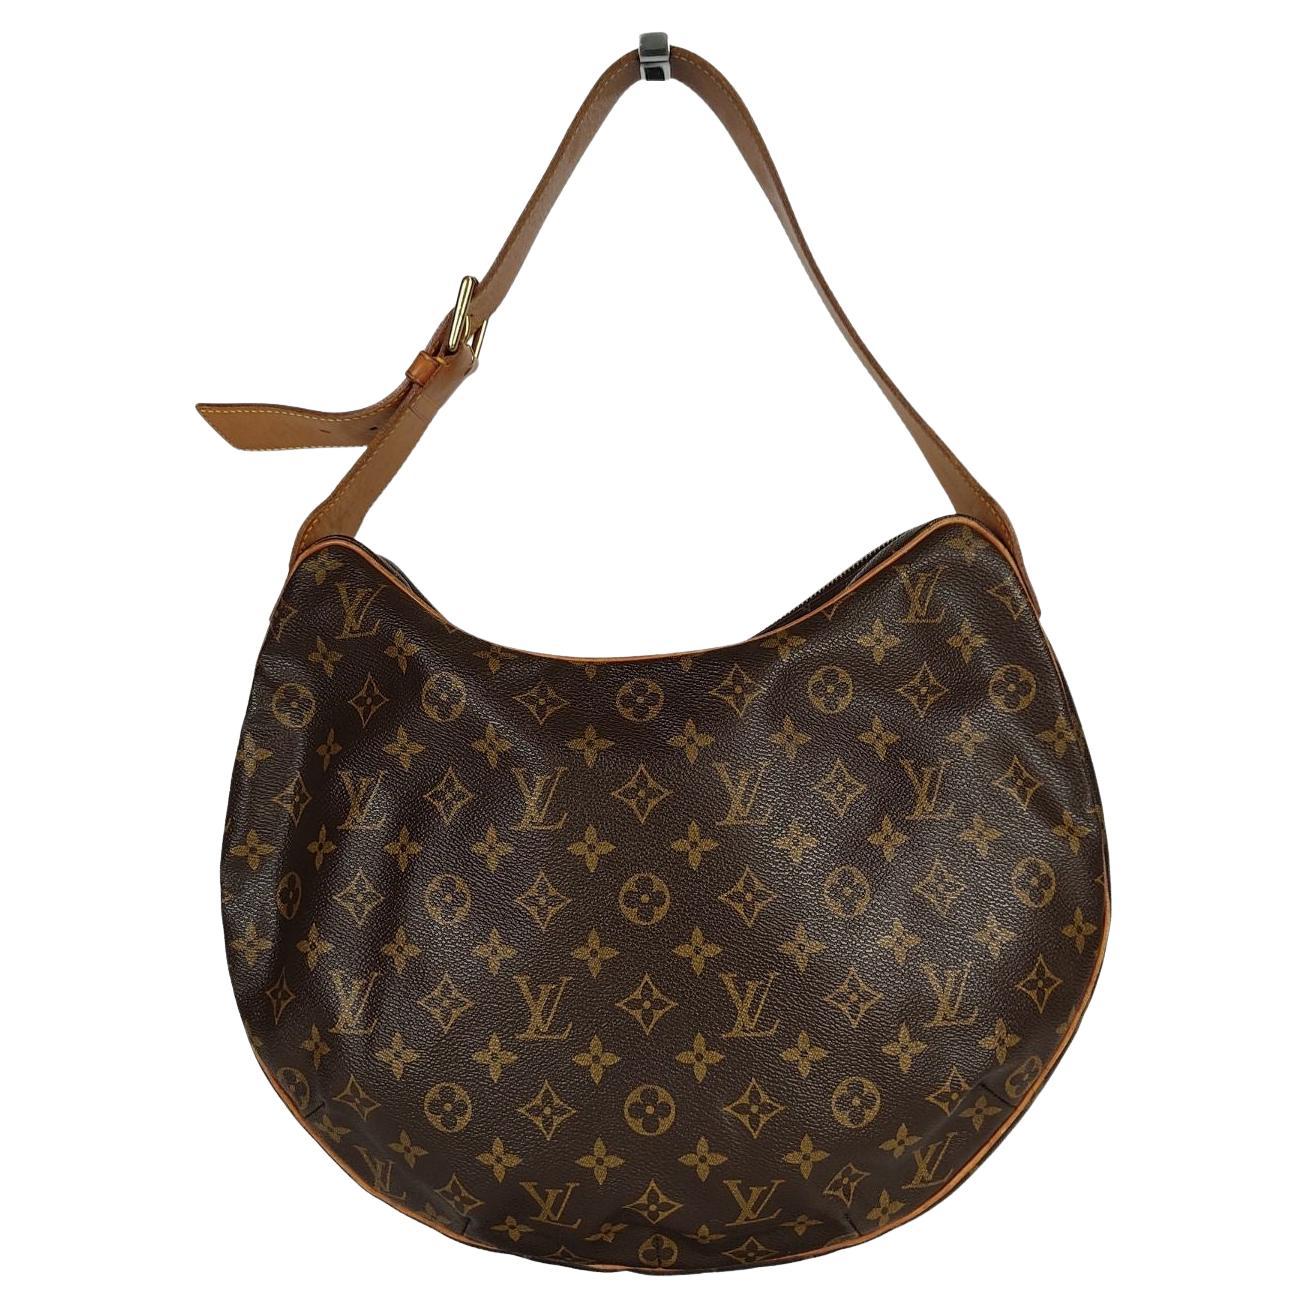 Vuitton Croissant - 8 For Sale on 1stDibs